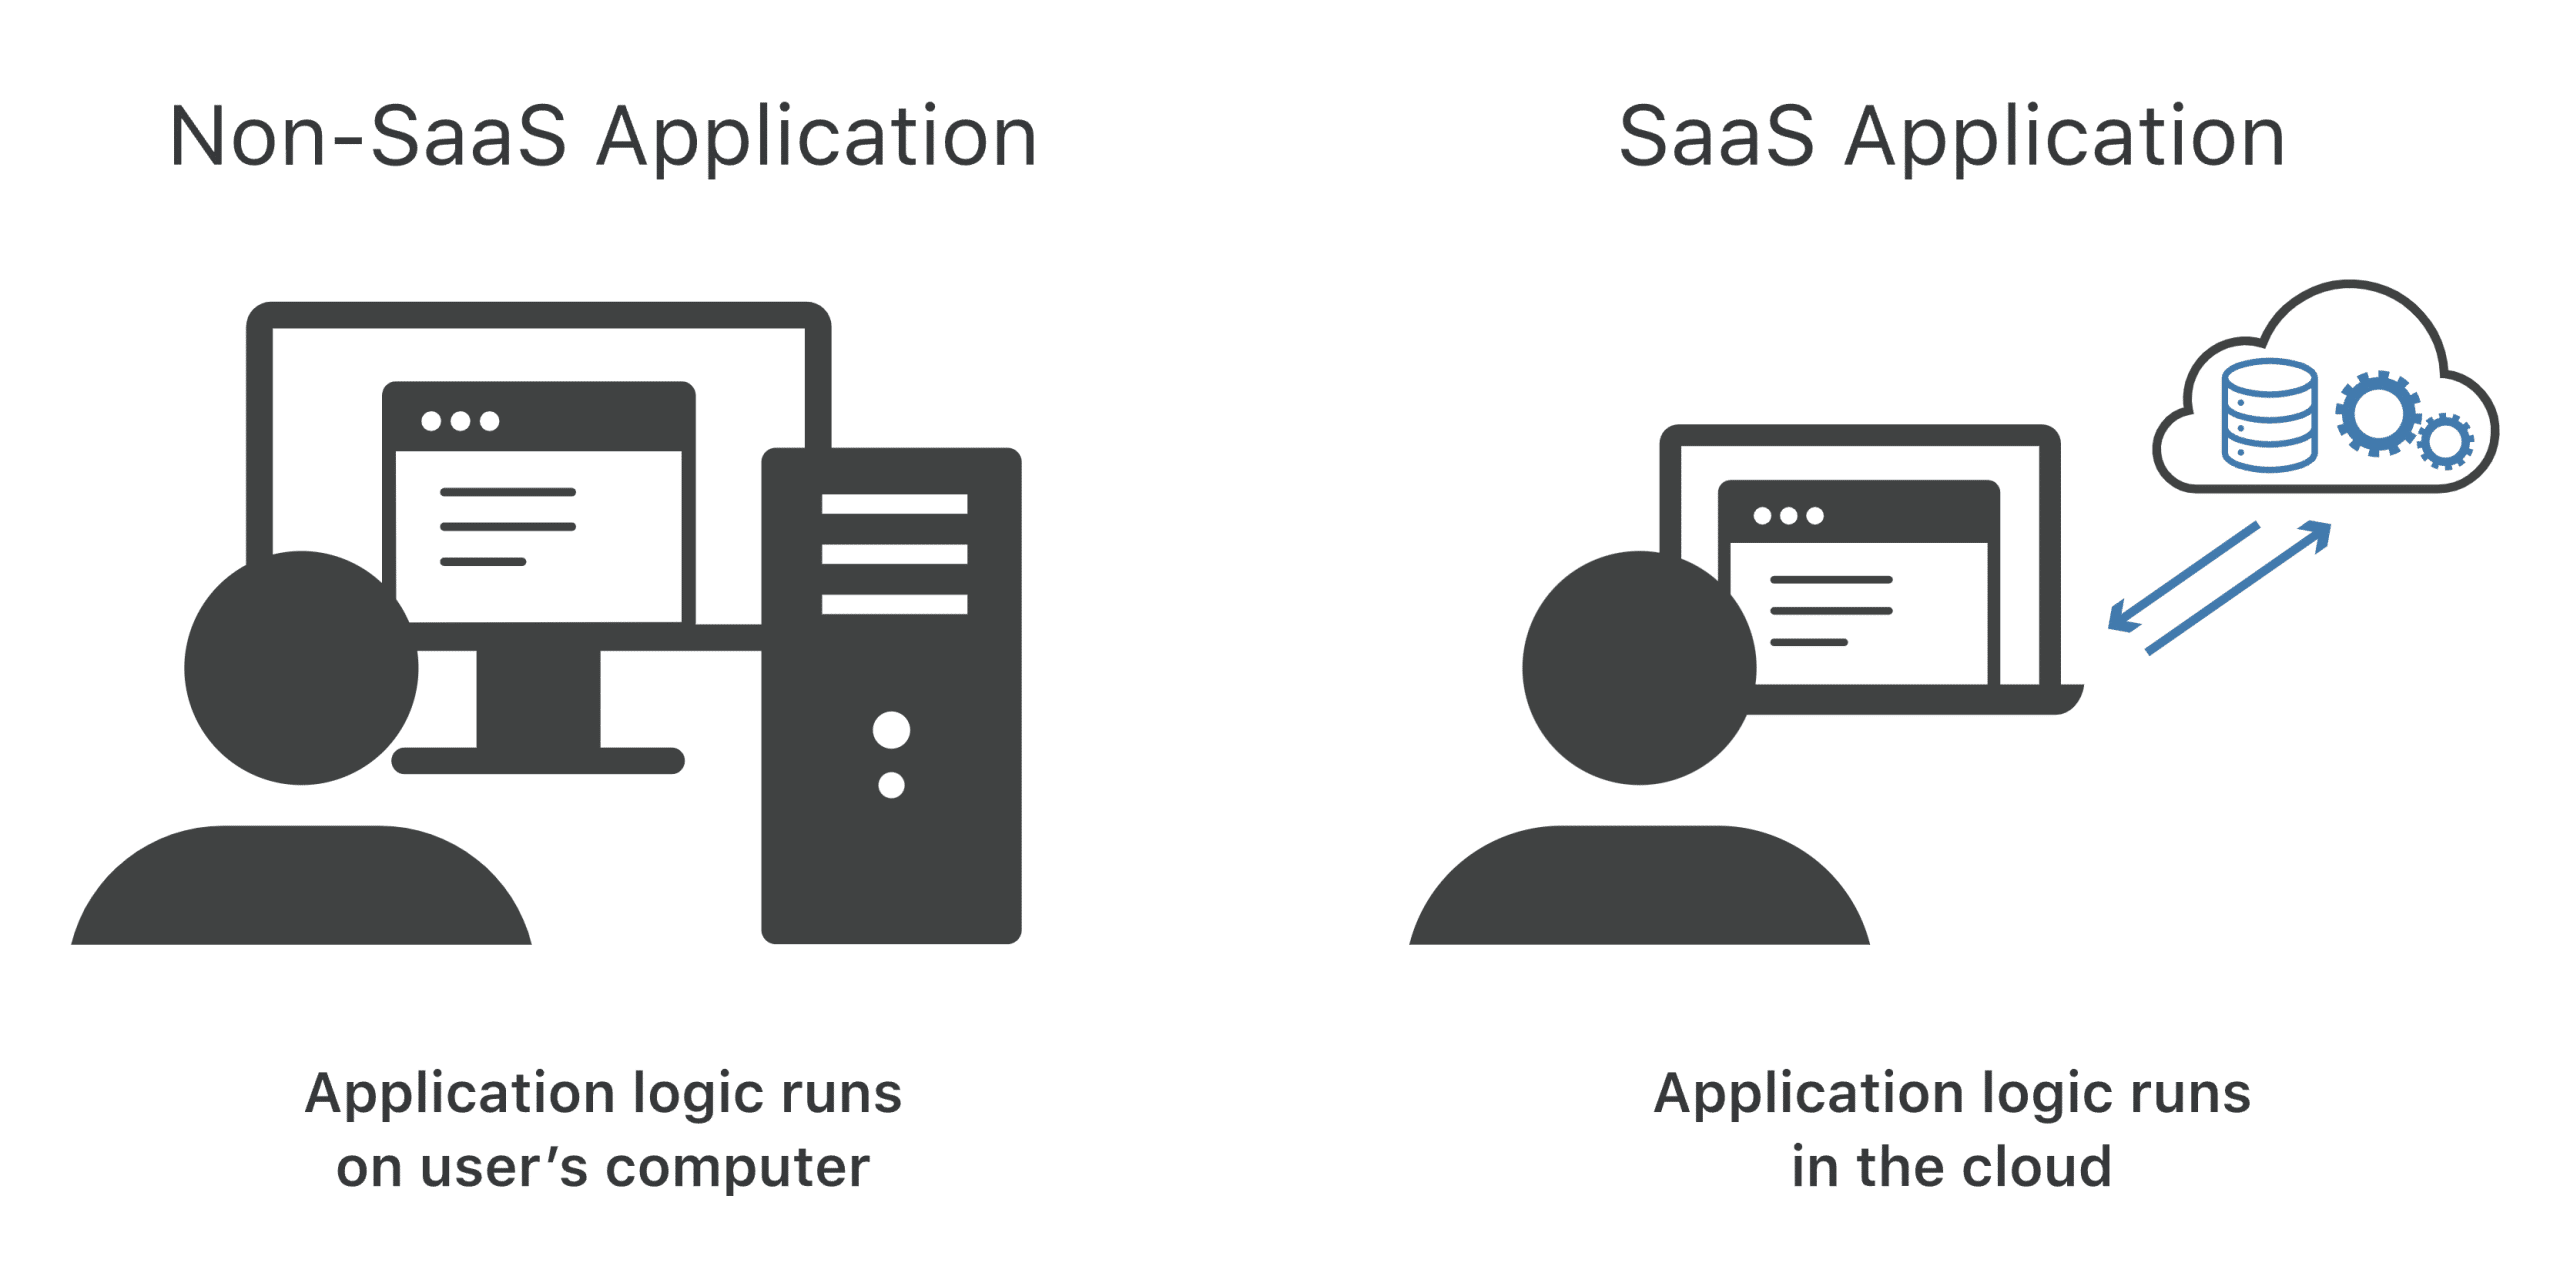 graphic compares non-SaaS application and SaaS application 